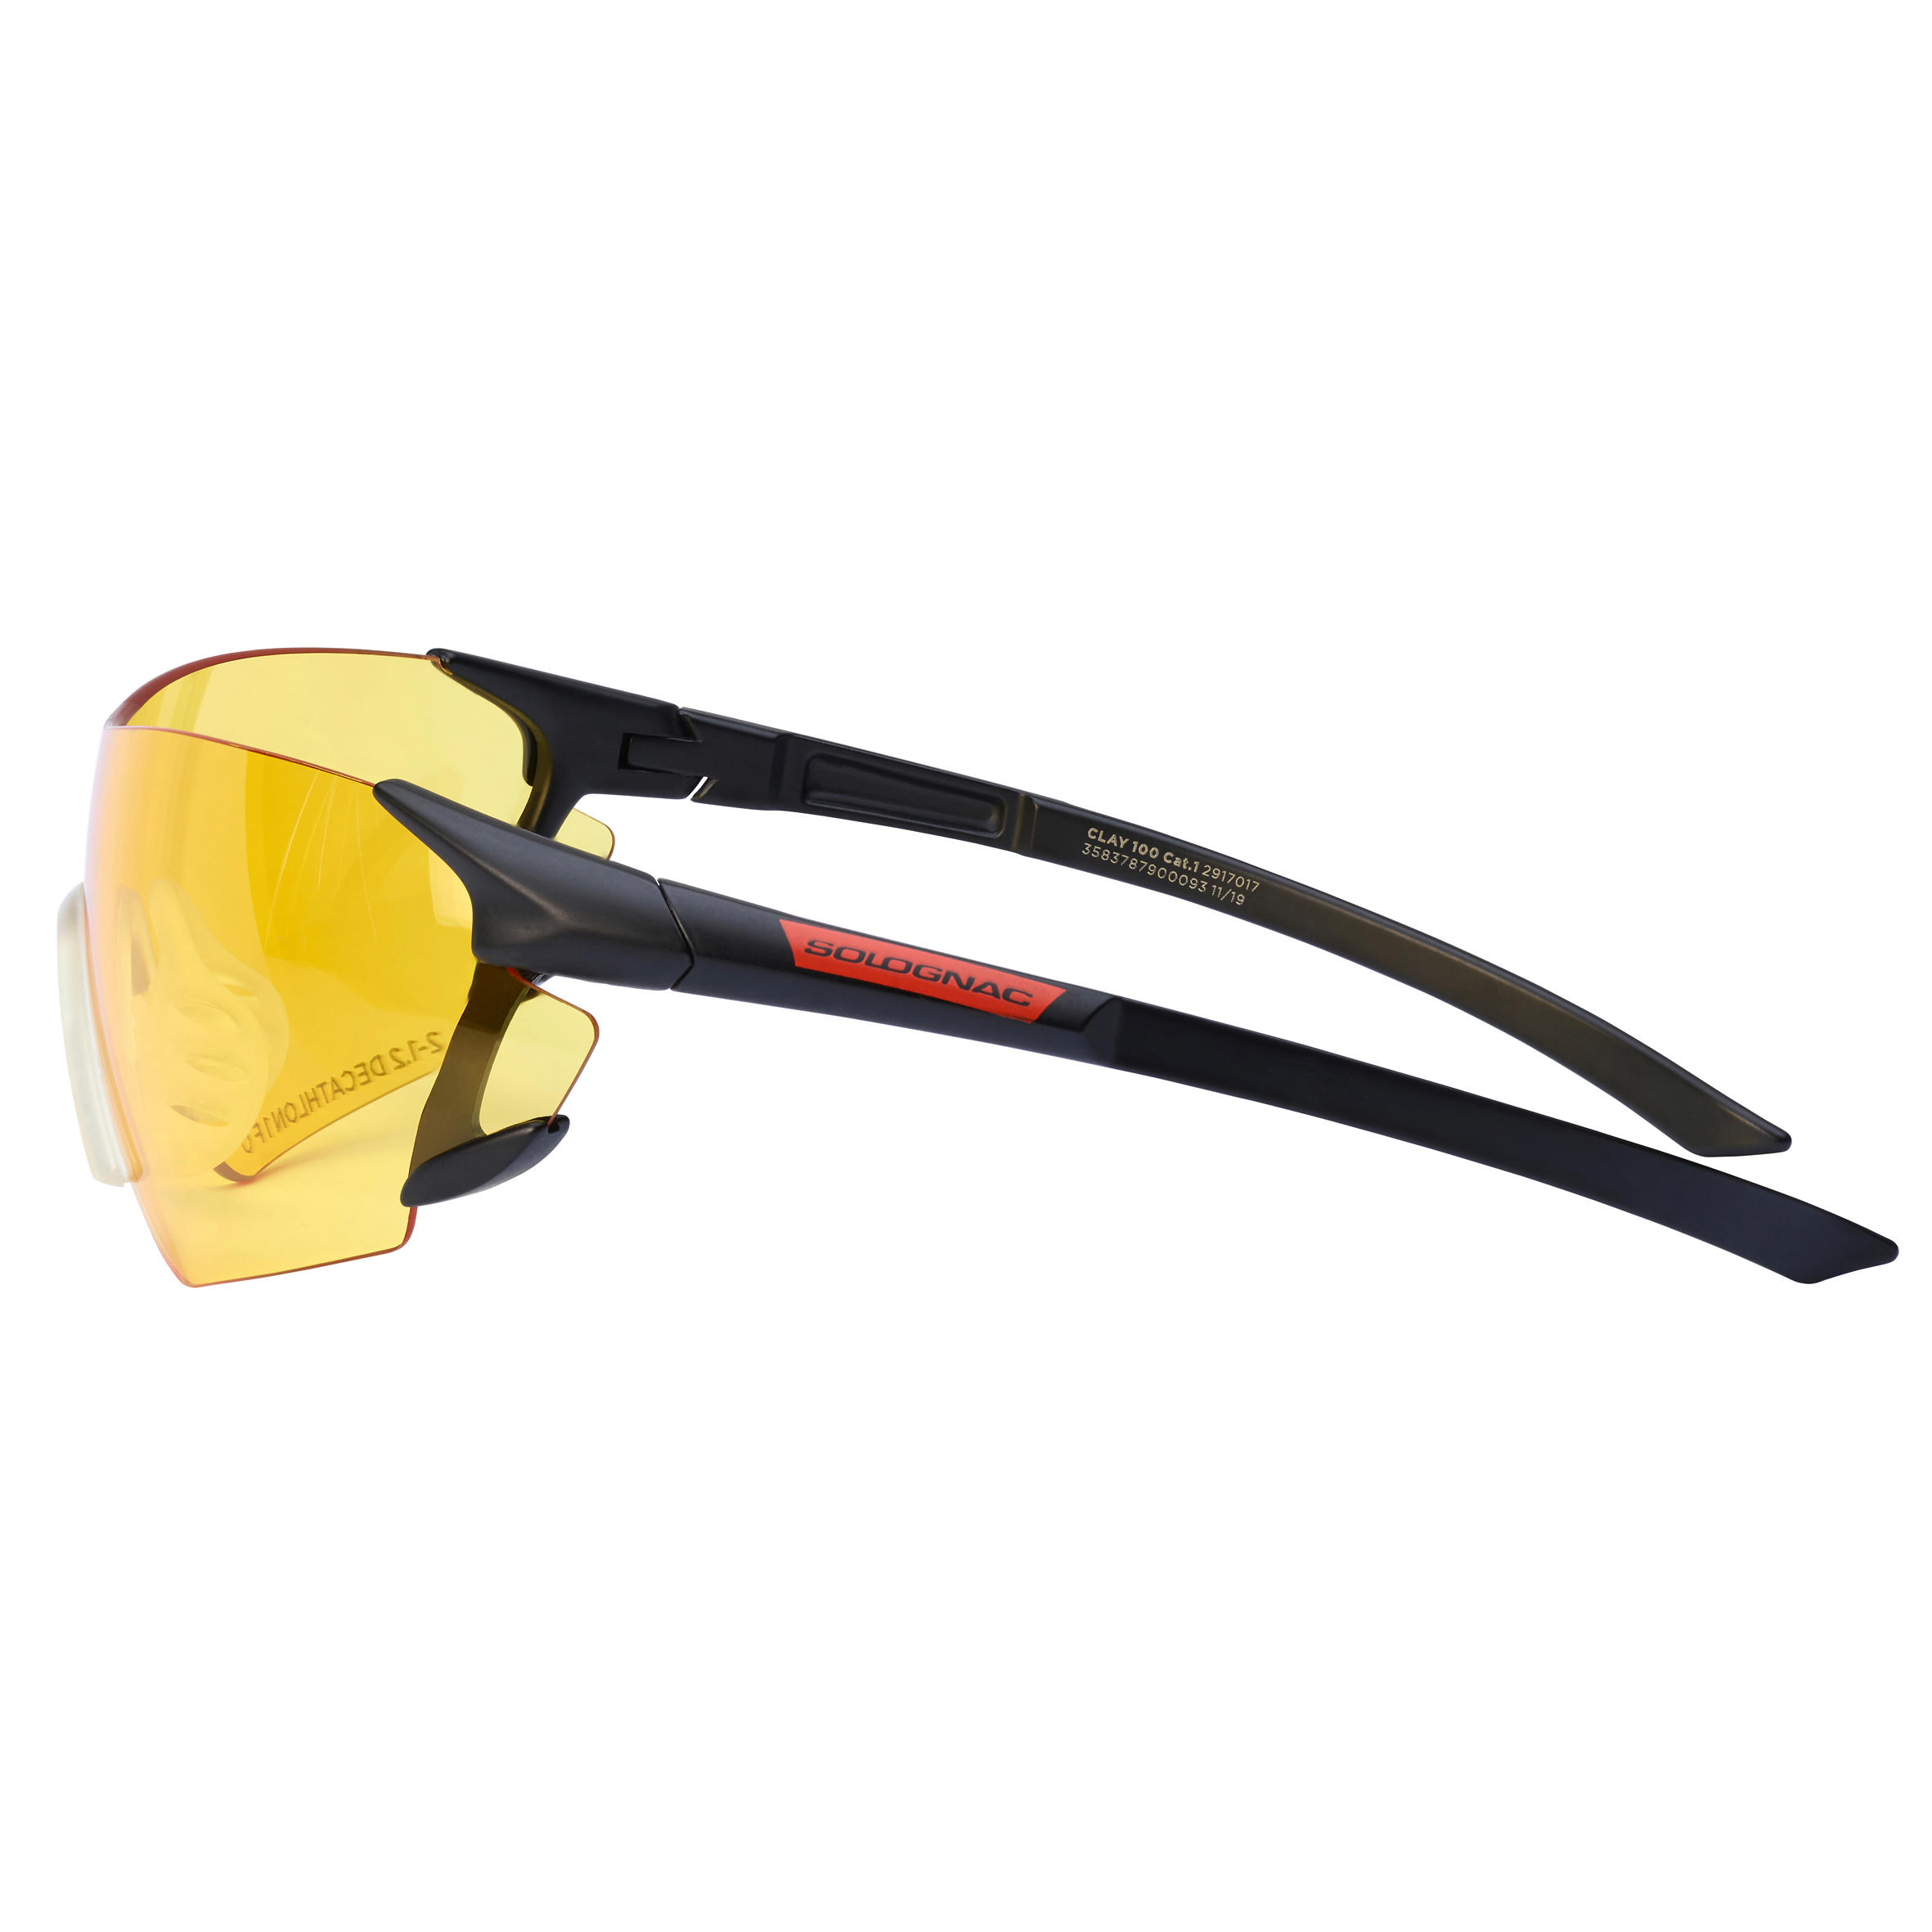 CLAY PIGEON SHOOTING PROTECTIVE GLASSES 100, YELLOW STRONG LENSES, CATEGORY 1 3/3